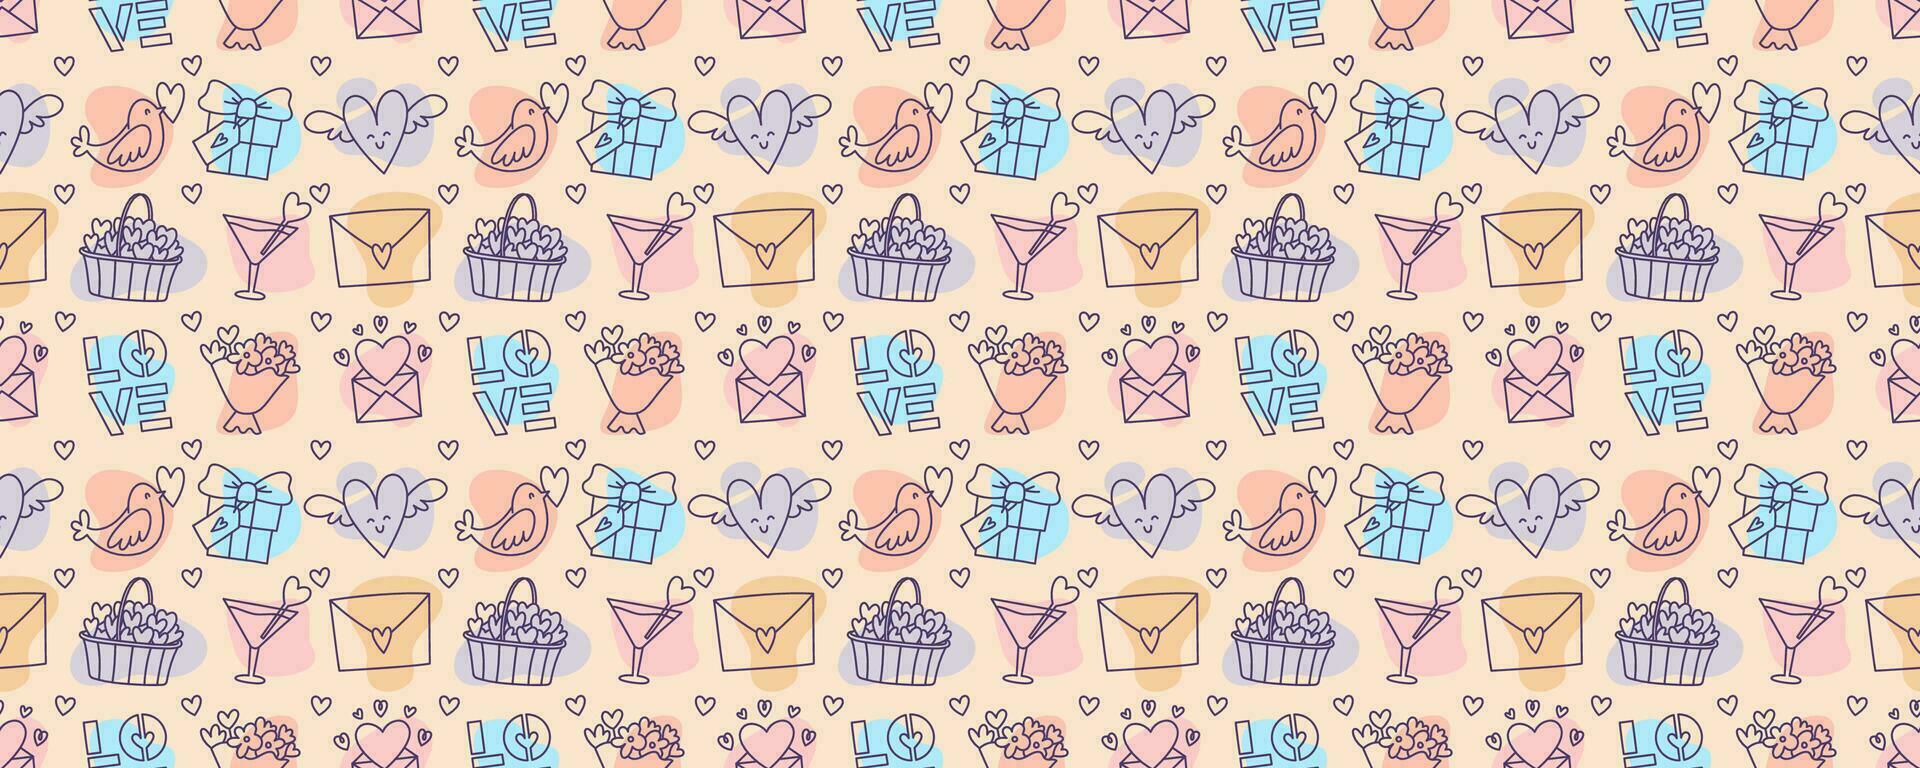 Valentines Day doodle style candy color seamless pattern, hand-drawn love theme icons cute background. Romantic mood collection. vector